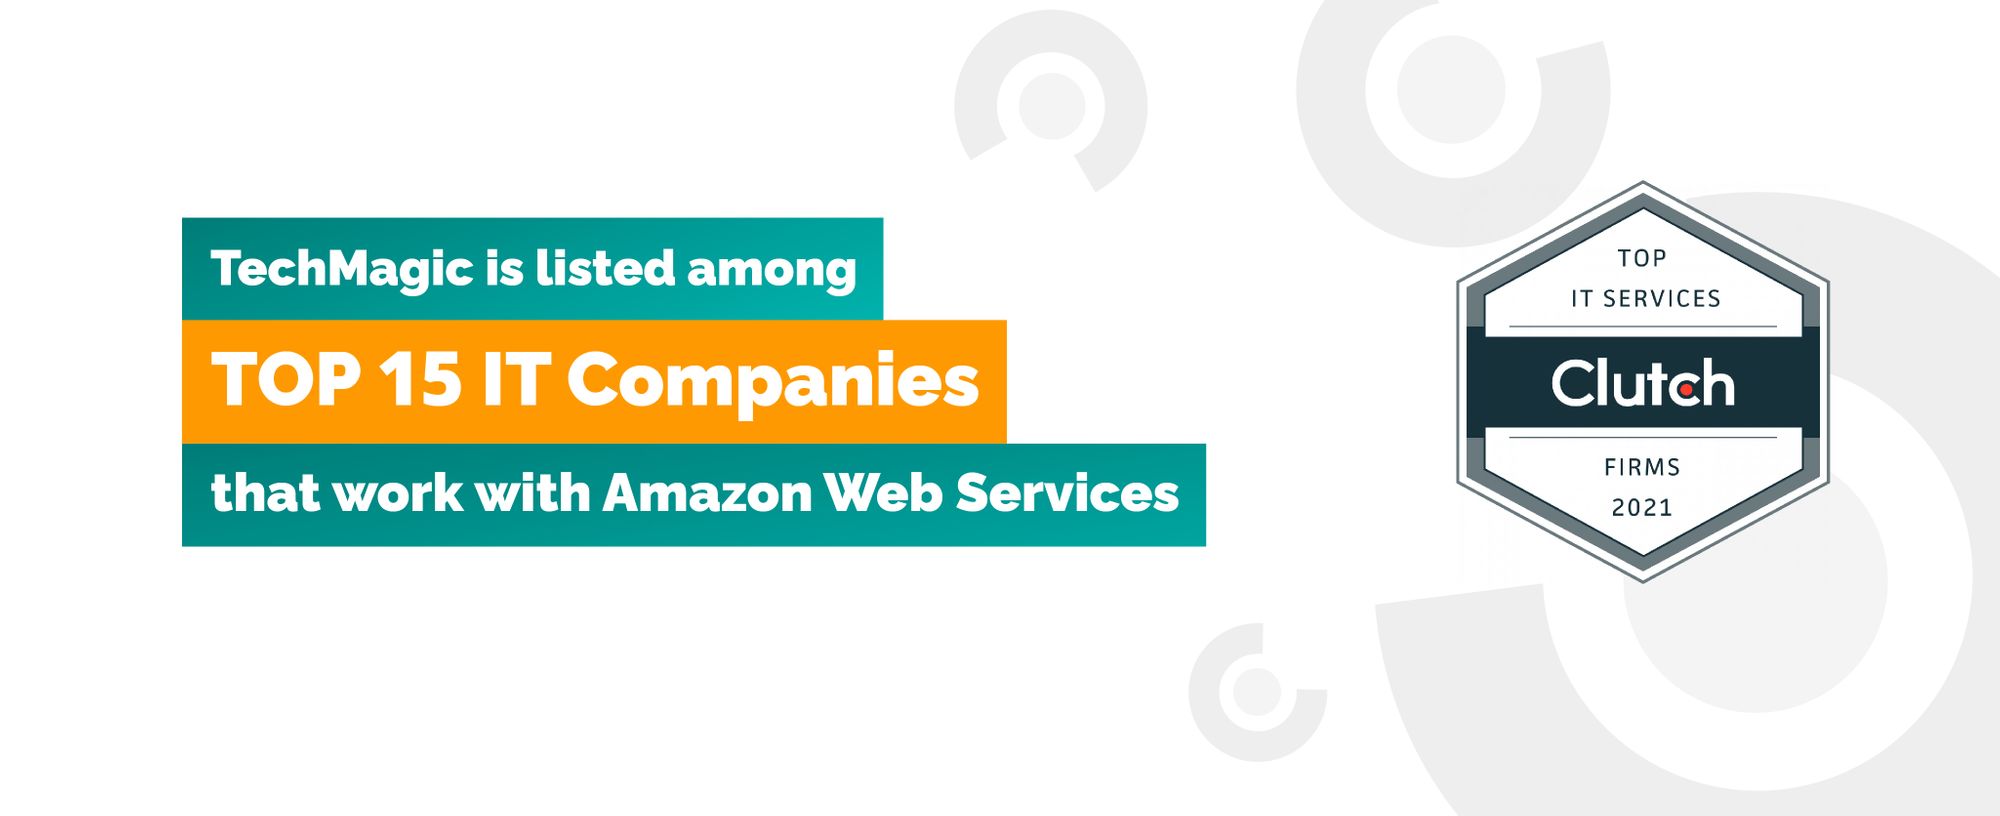 TechMagic is among the TOP 15 companies that work with AWS